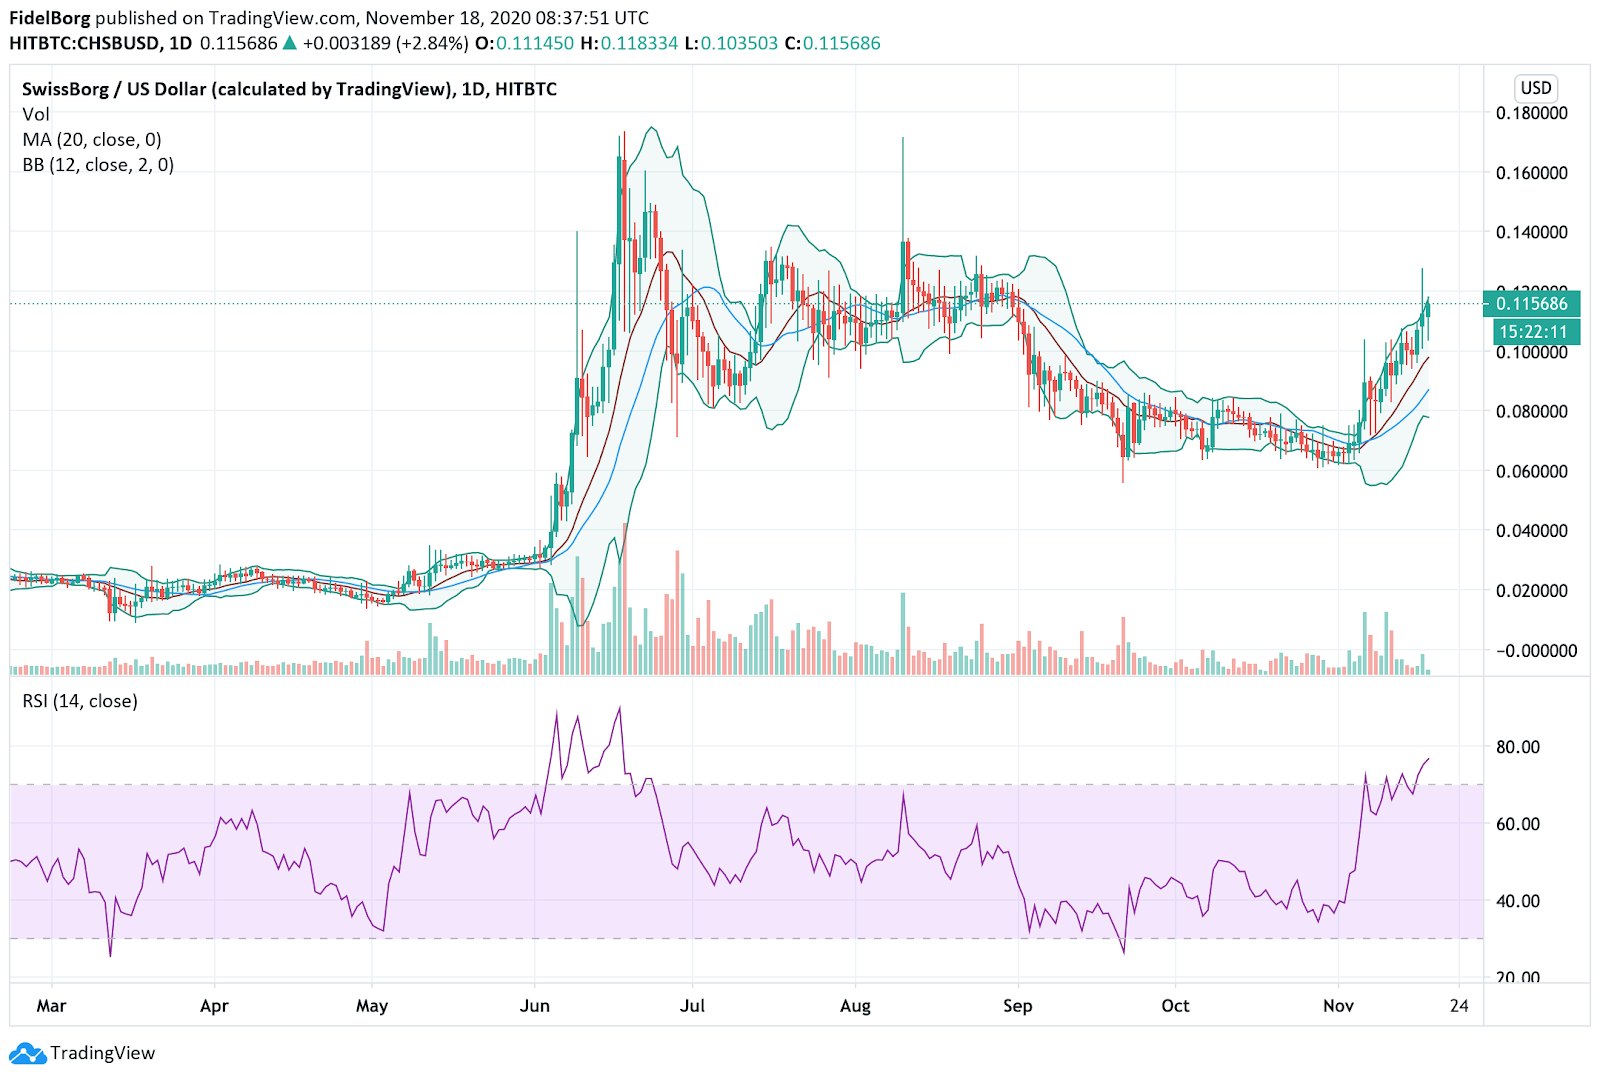 CHSB/USD (daily): RSI(14), 20 days moving average and Bollinger bands (Source: tradingview.com)